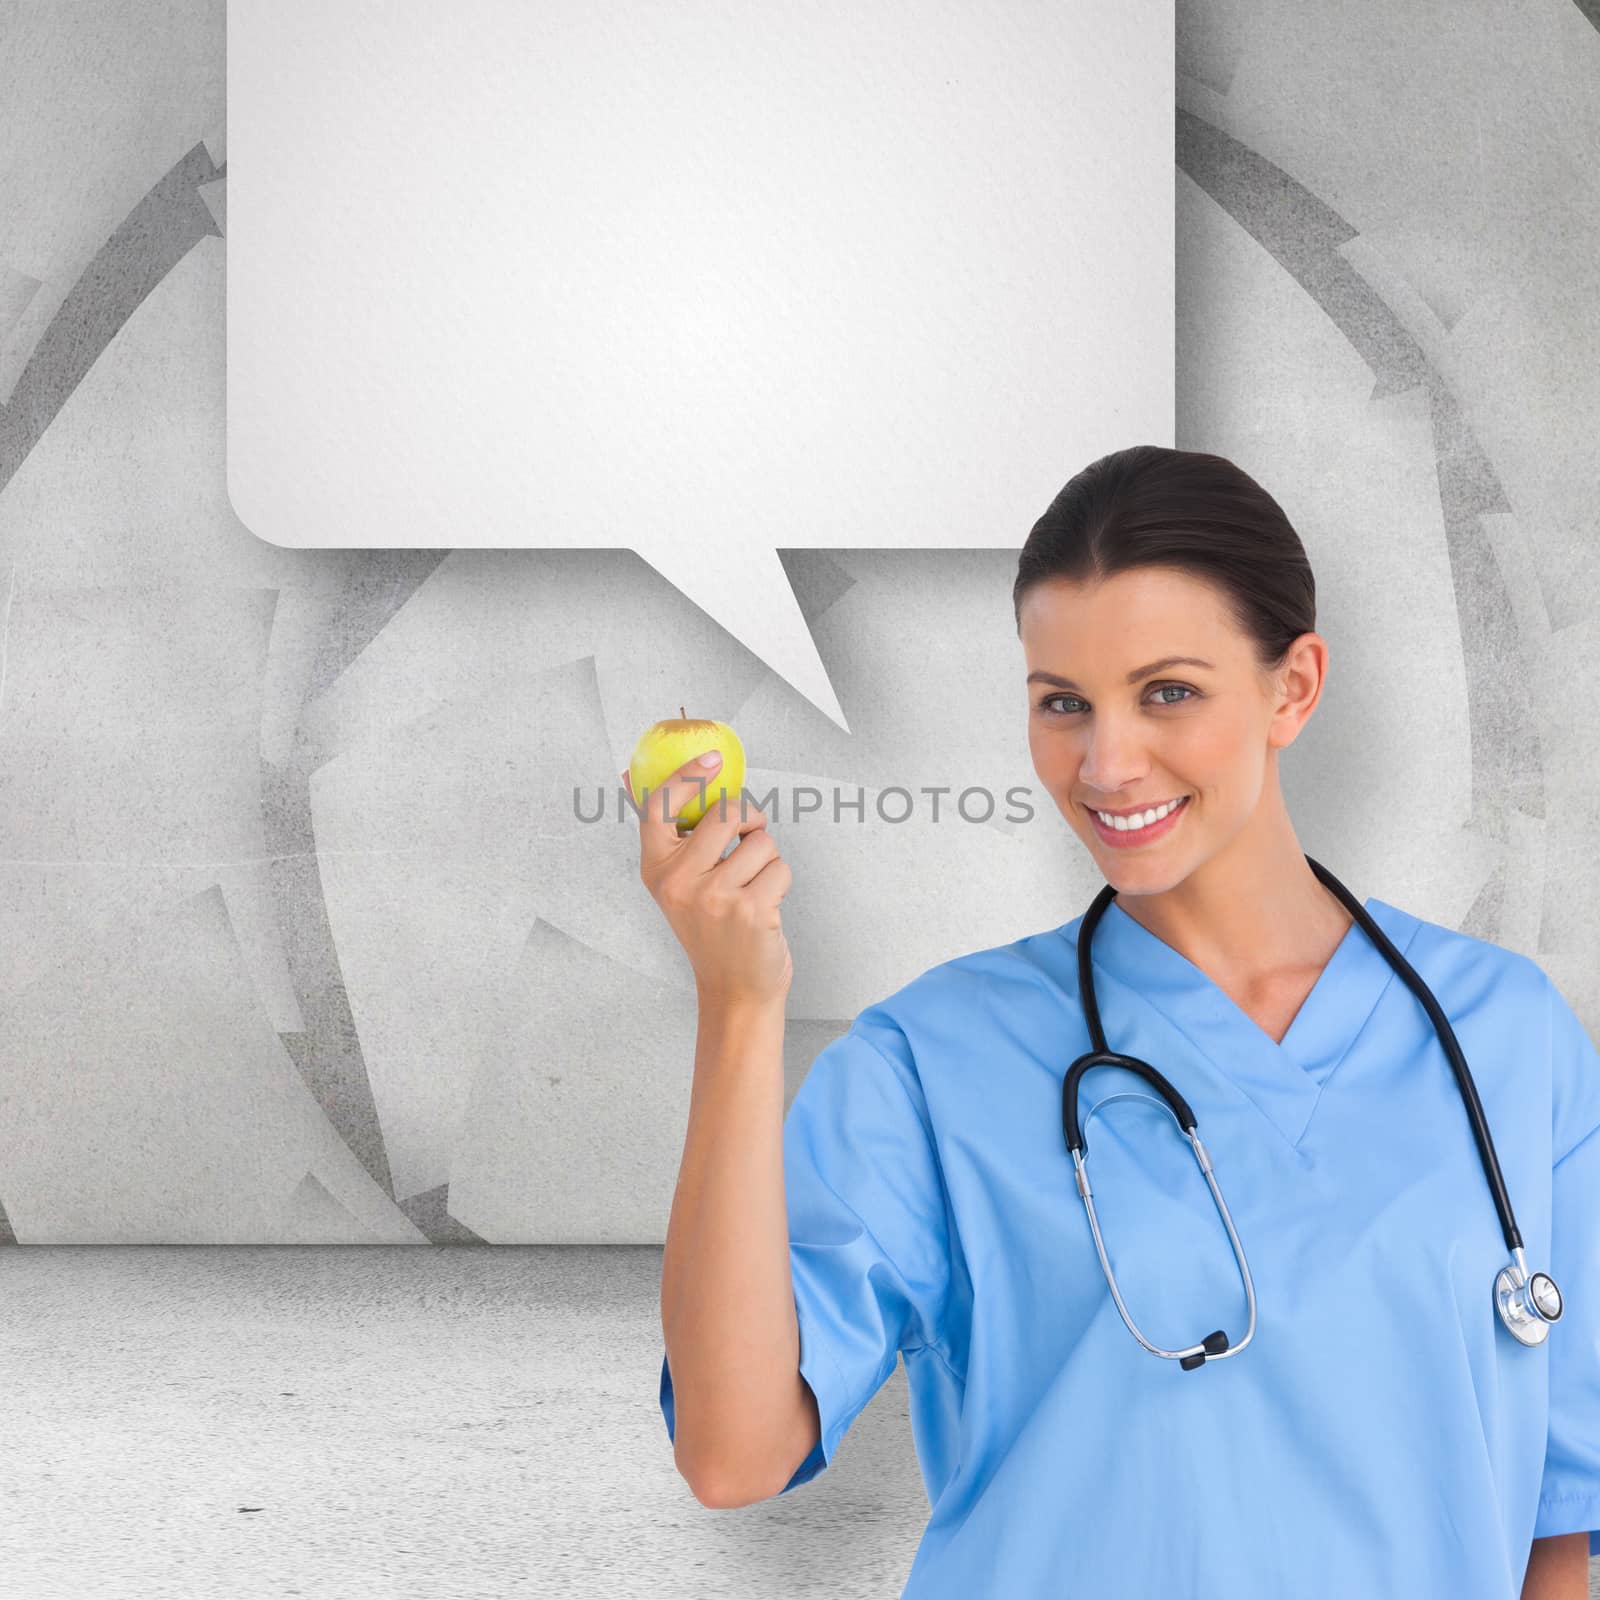 Composite image of happy surgeon holding an apple and smiling at camera by Wavebreakmedia